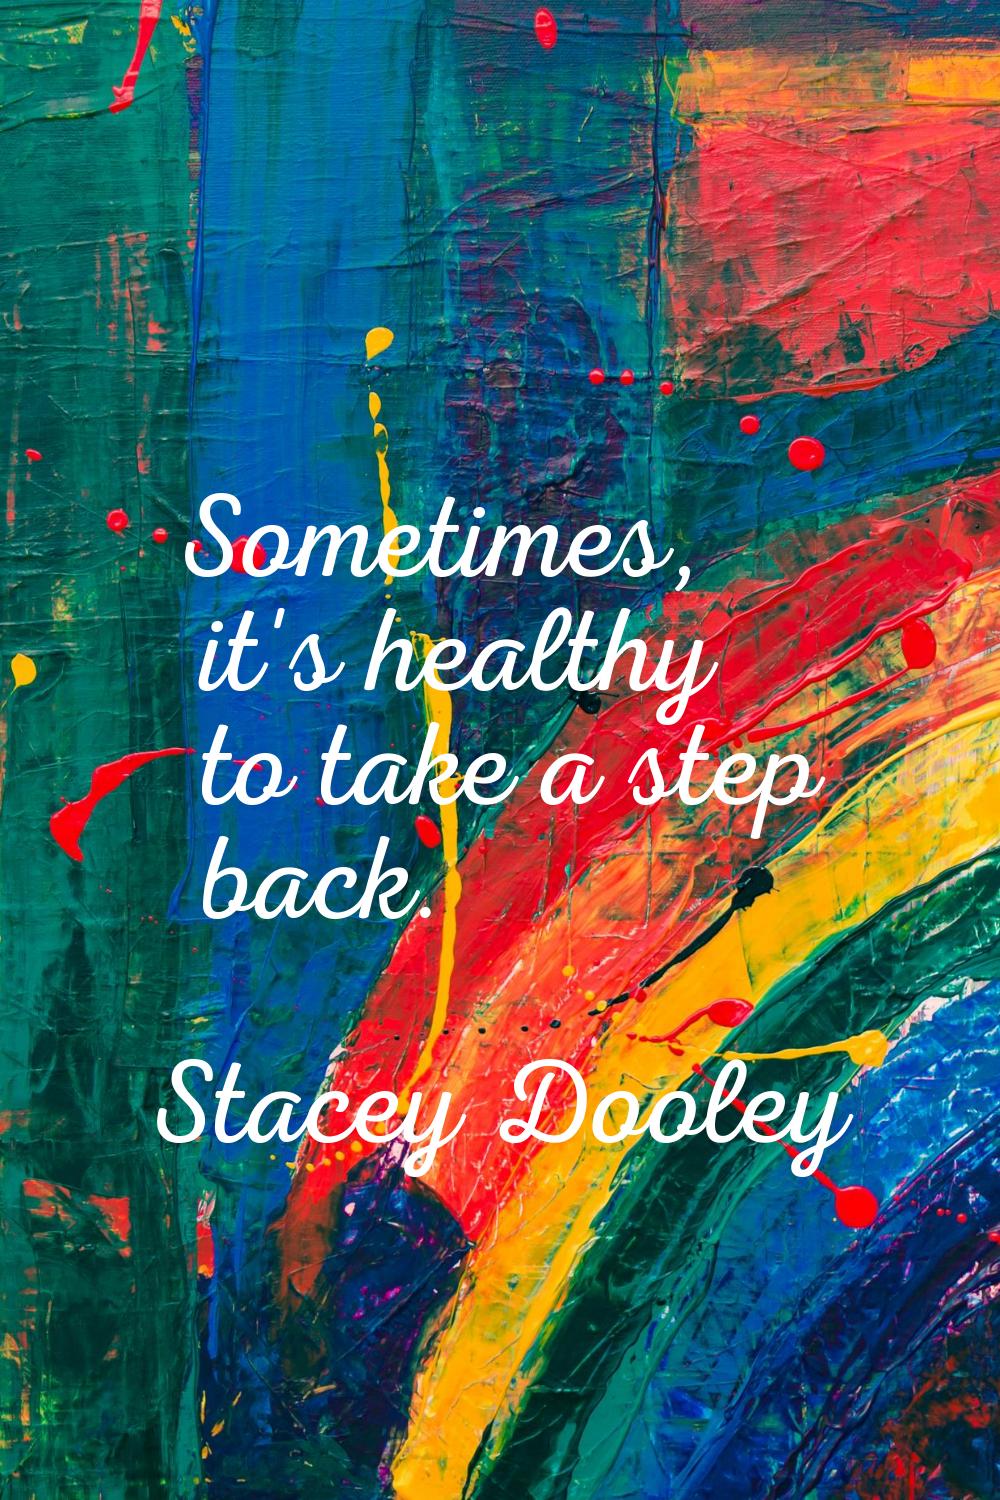 Sometimes, it's healthy to take a step back.